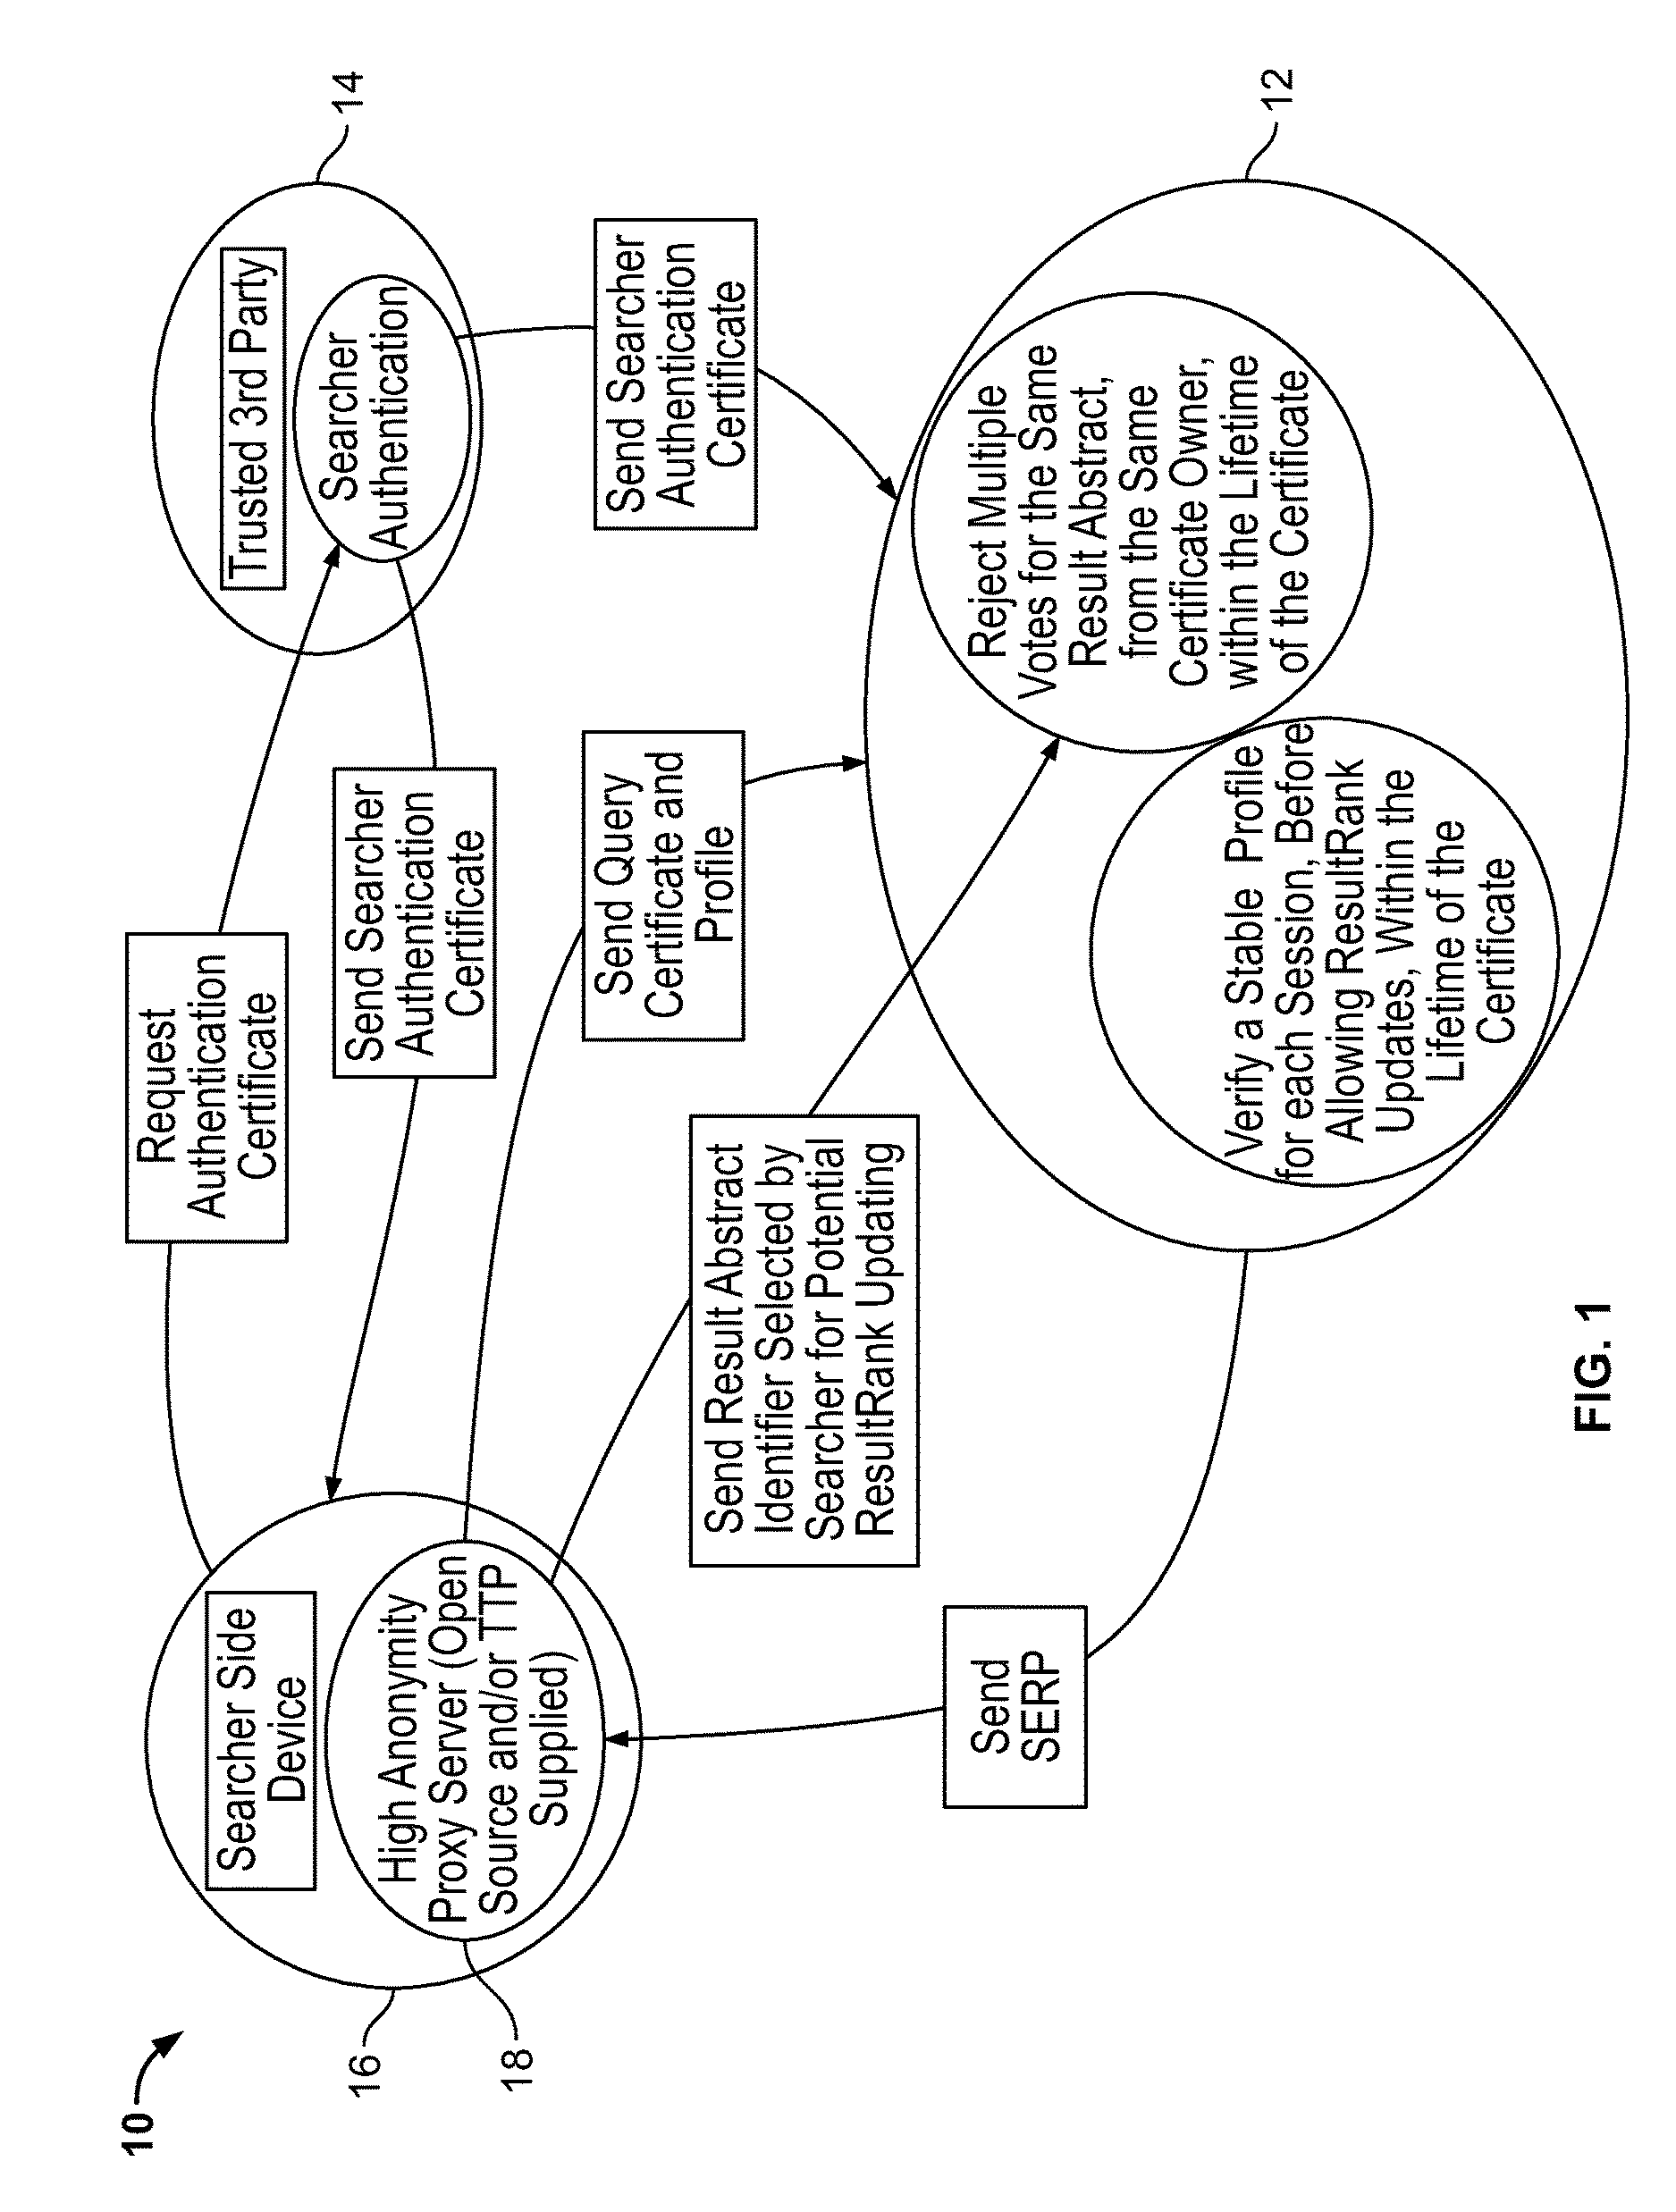 System and Method for Personalized Search While Maintaining Searcher Privacy